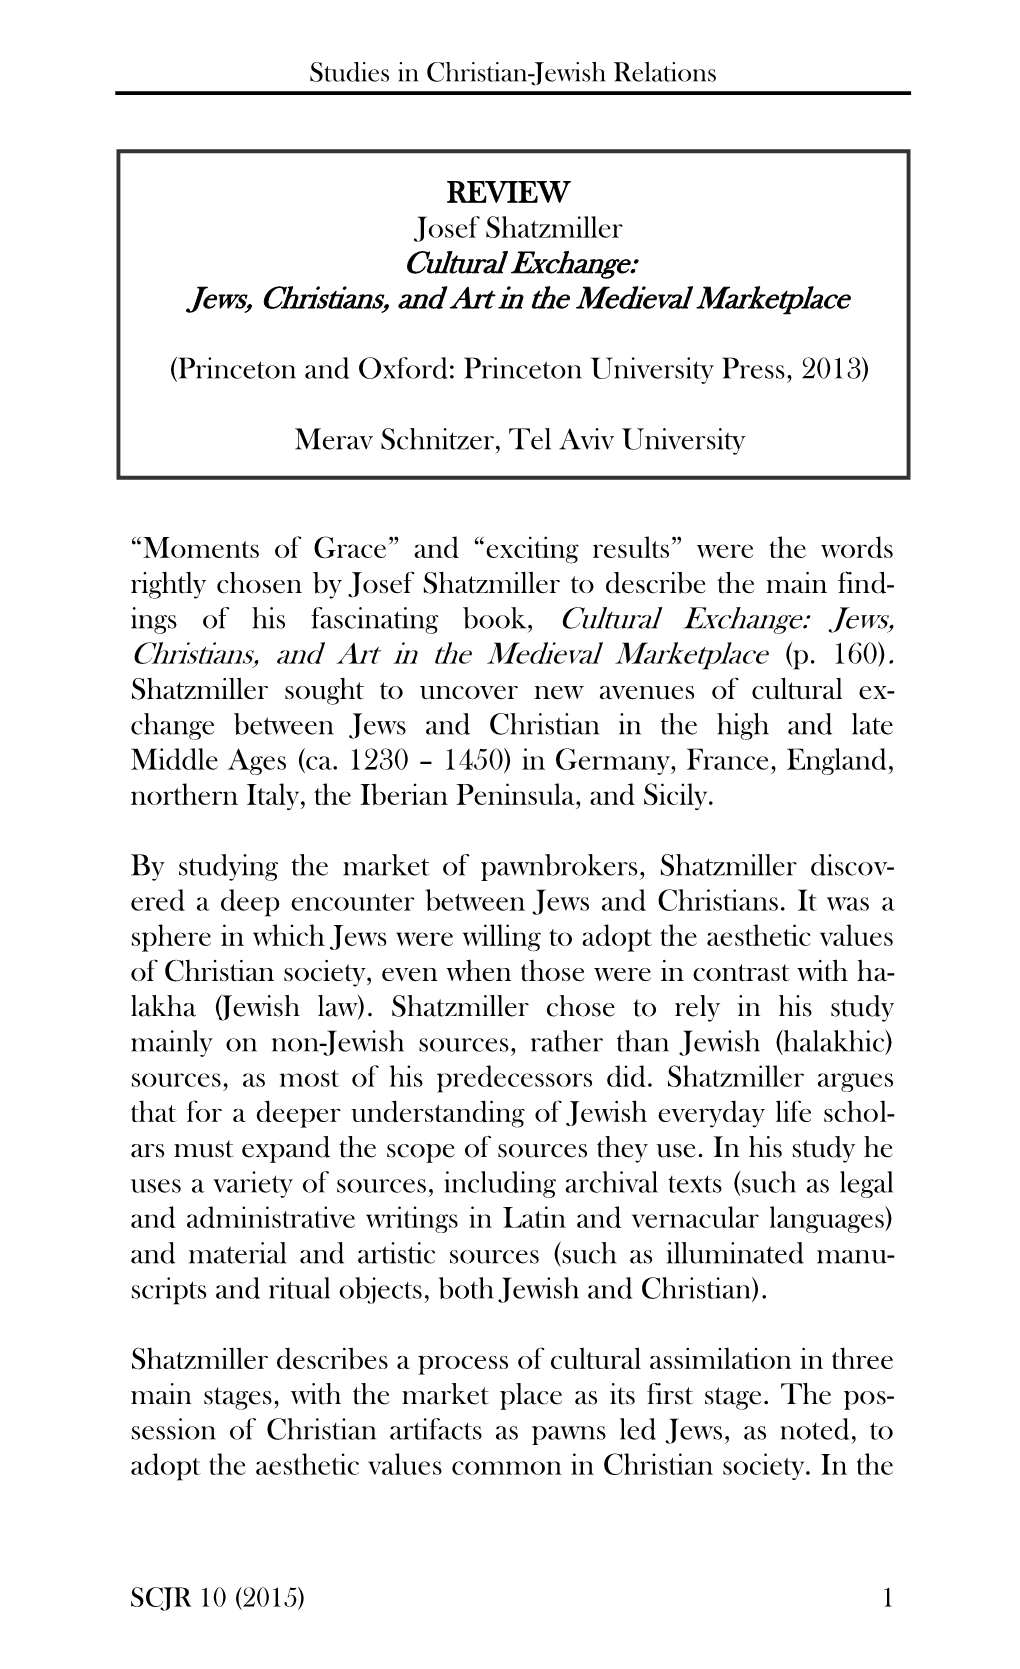 Jews, Christians, and Art in the Medieval Marketplace